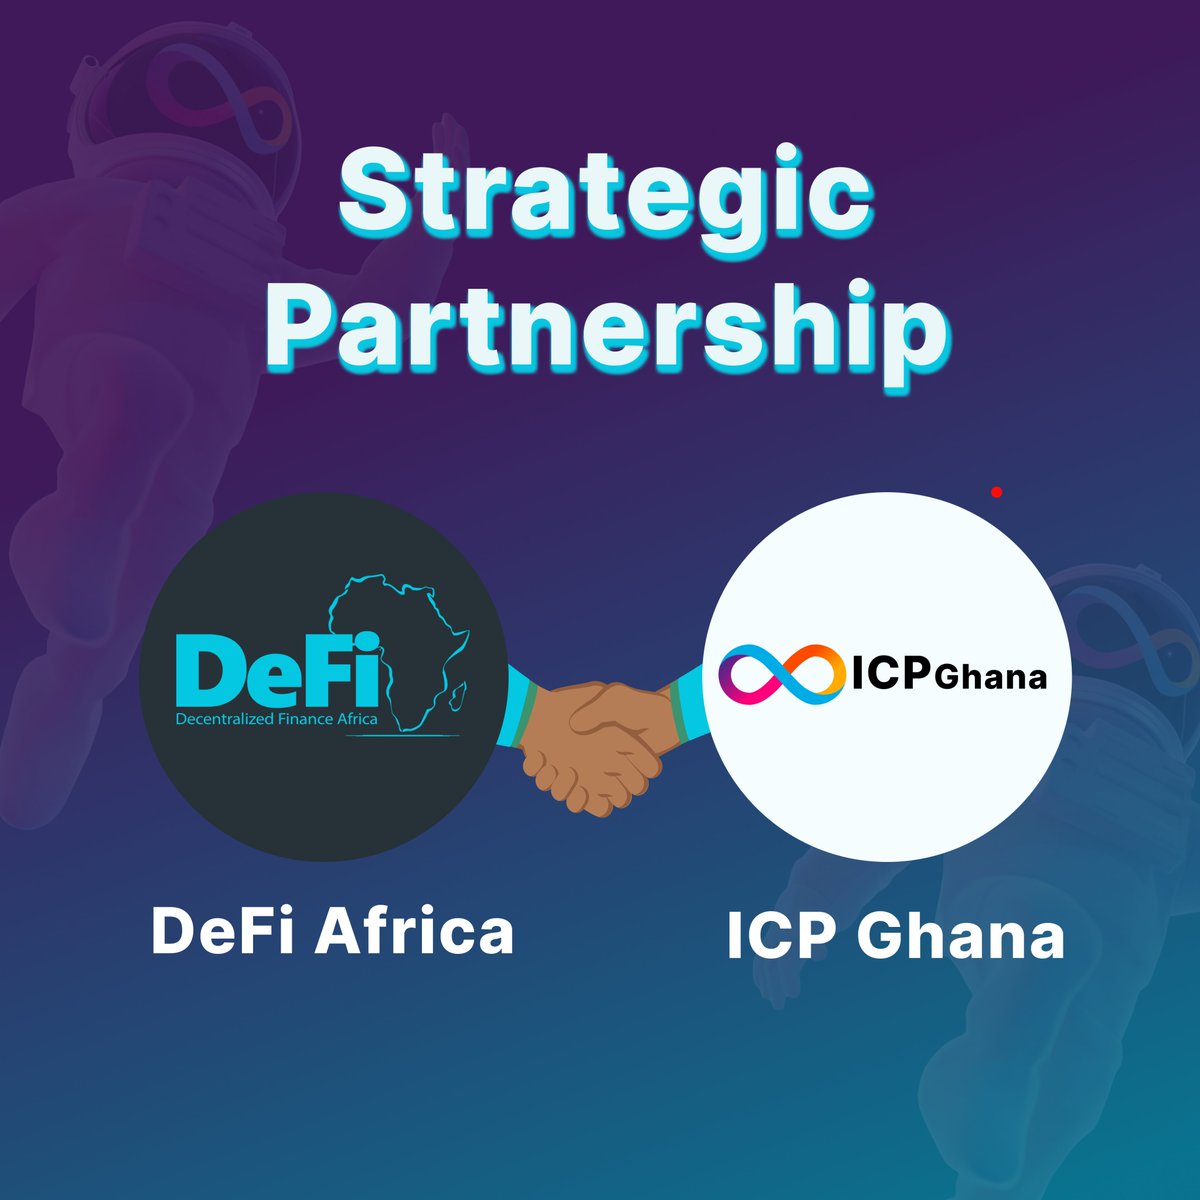 1/2 Excited to announce our partnership with @defiafrica DeFi Africa is empowering Individuals and Businesses to Adopt #Web3 Innovations for Lasting Impact Through this partnership, ICP Ghana will gain access to DeFi Africa's vibrant community and pool of existing developers.